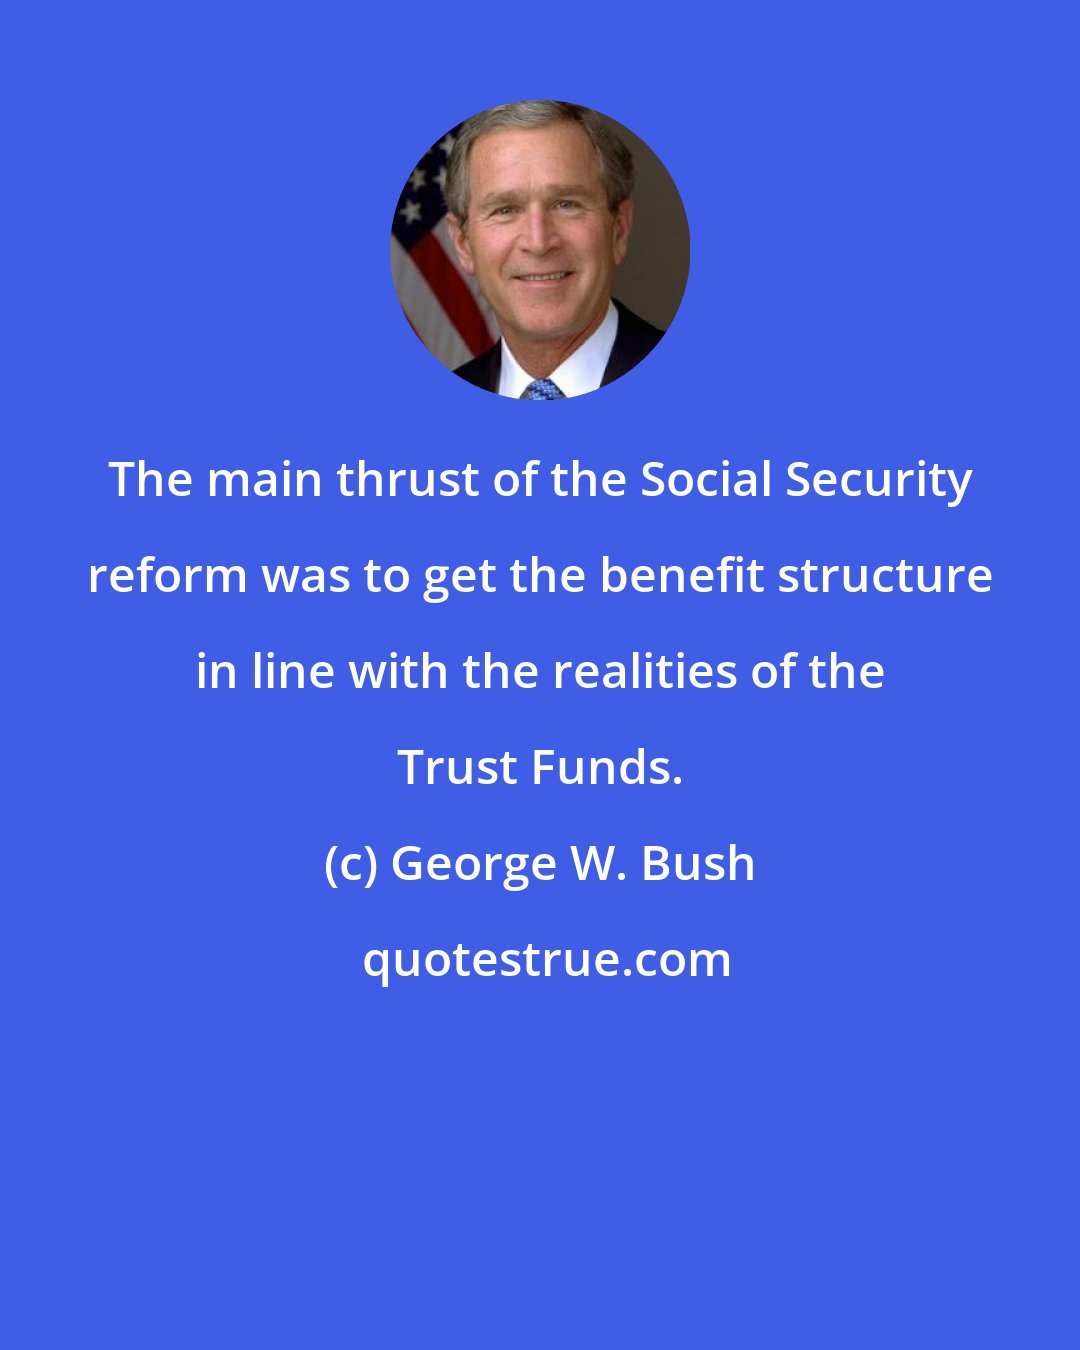 George W. Bush: The main thrust of the Social Security reform was to get the benefit structure in line with the realities of the Trust Funds.